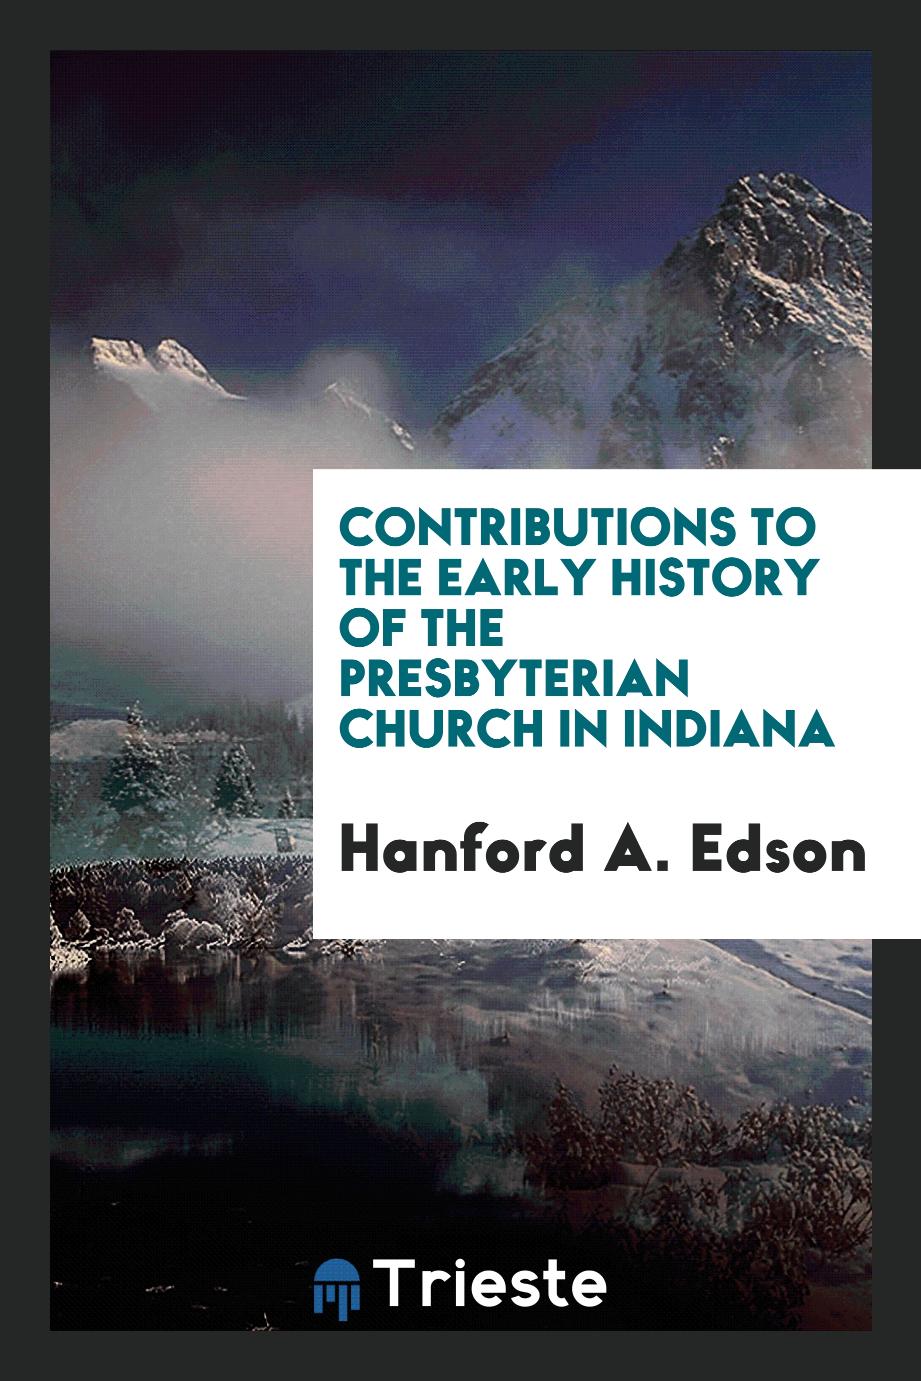 Contributions to the Early History of the Presbyterian Church in Indiana